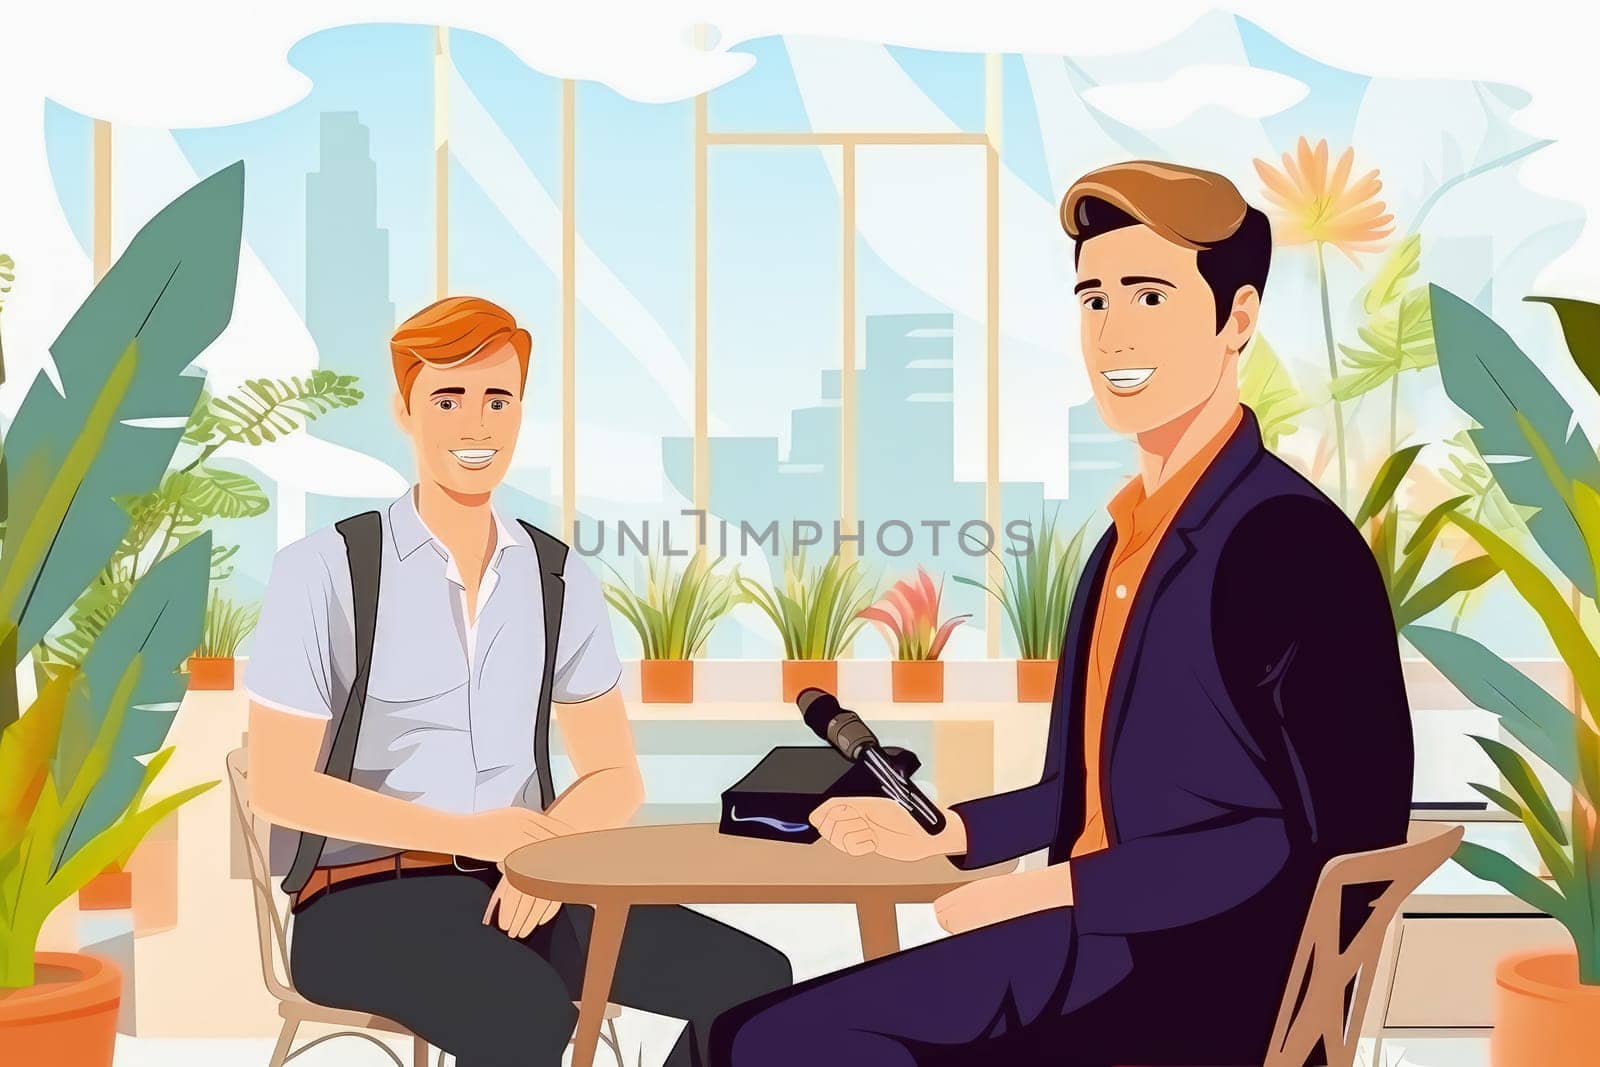 A journalist interviews a man at a conference. High quality illustration